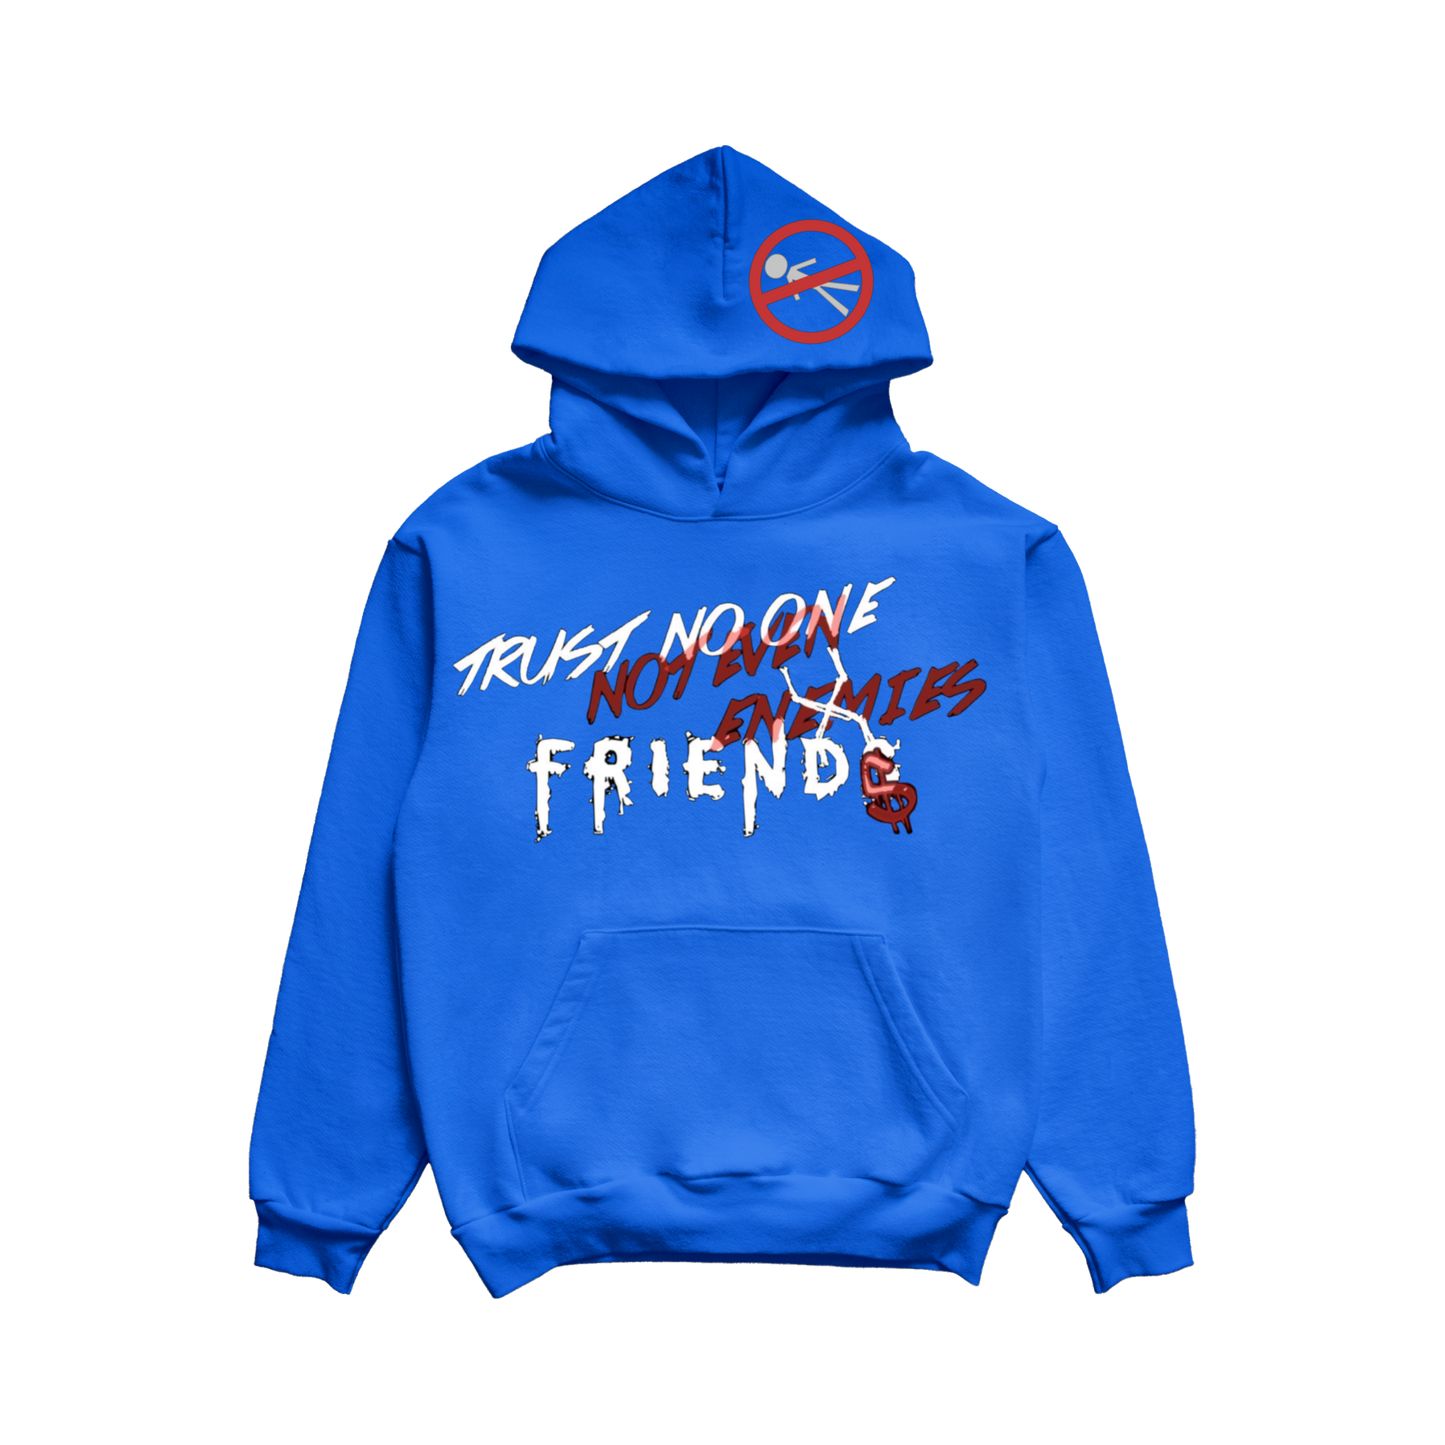 Trust No One Not Even Friends Solo Hoodie